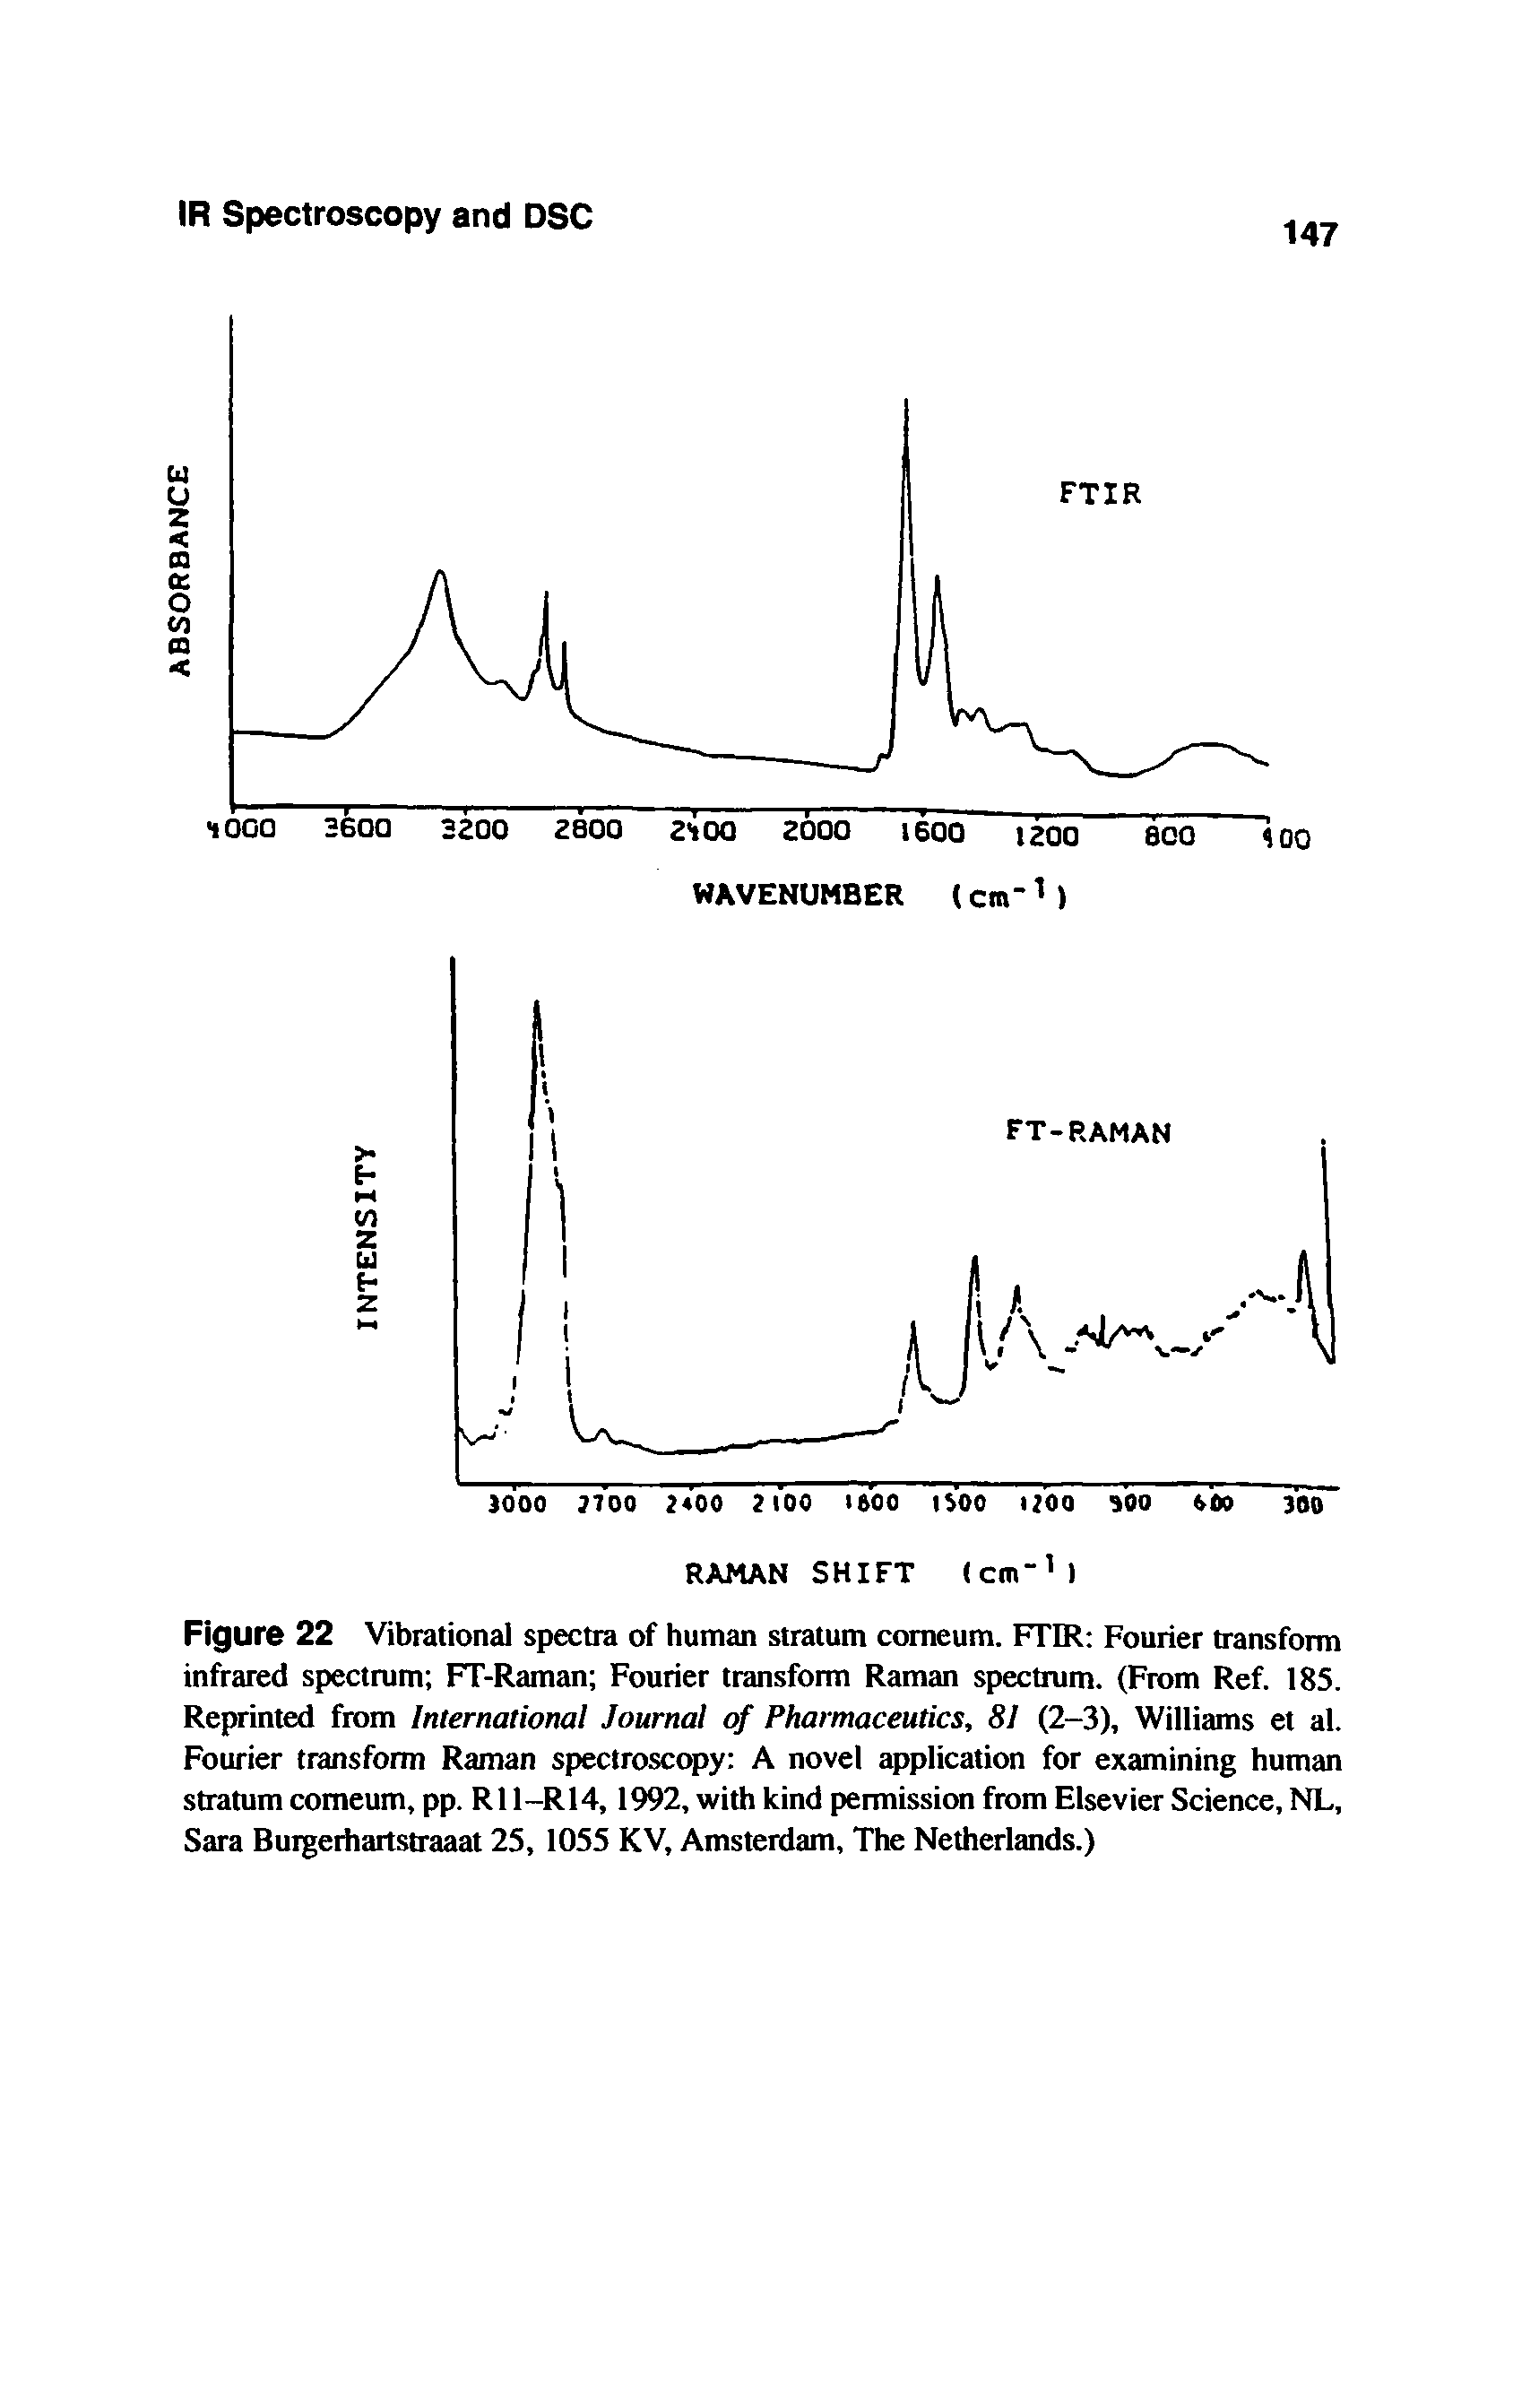 Figure 22 Vibrational spectra of human stratum comeum. FTIR Fourier transform infrared spectrum FT-Raman Fourier transform Raman spectrum. (From Ref. 185. Reprinted from International Journal of Pharmaceutics, 81 (2-3), Williams et al. Fourier transform Raman spectroscopy A novel application for examining human stratum comeum, pp. R11-R14,1992, with kind permission from Elsevier Science, ML, Sara Burgerhartstraaat 25, 1055 KV, Amsterdam, The Netherlands.)...